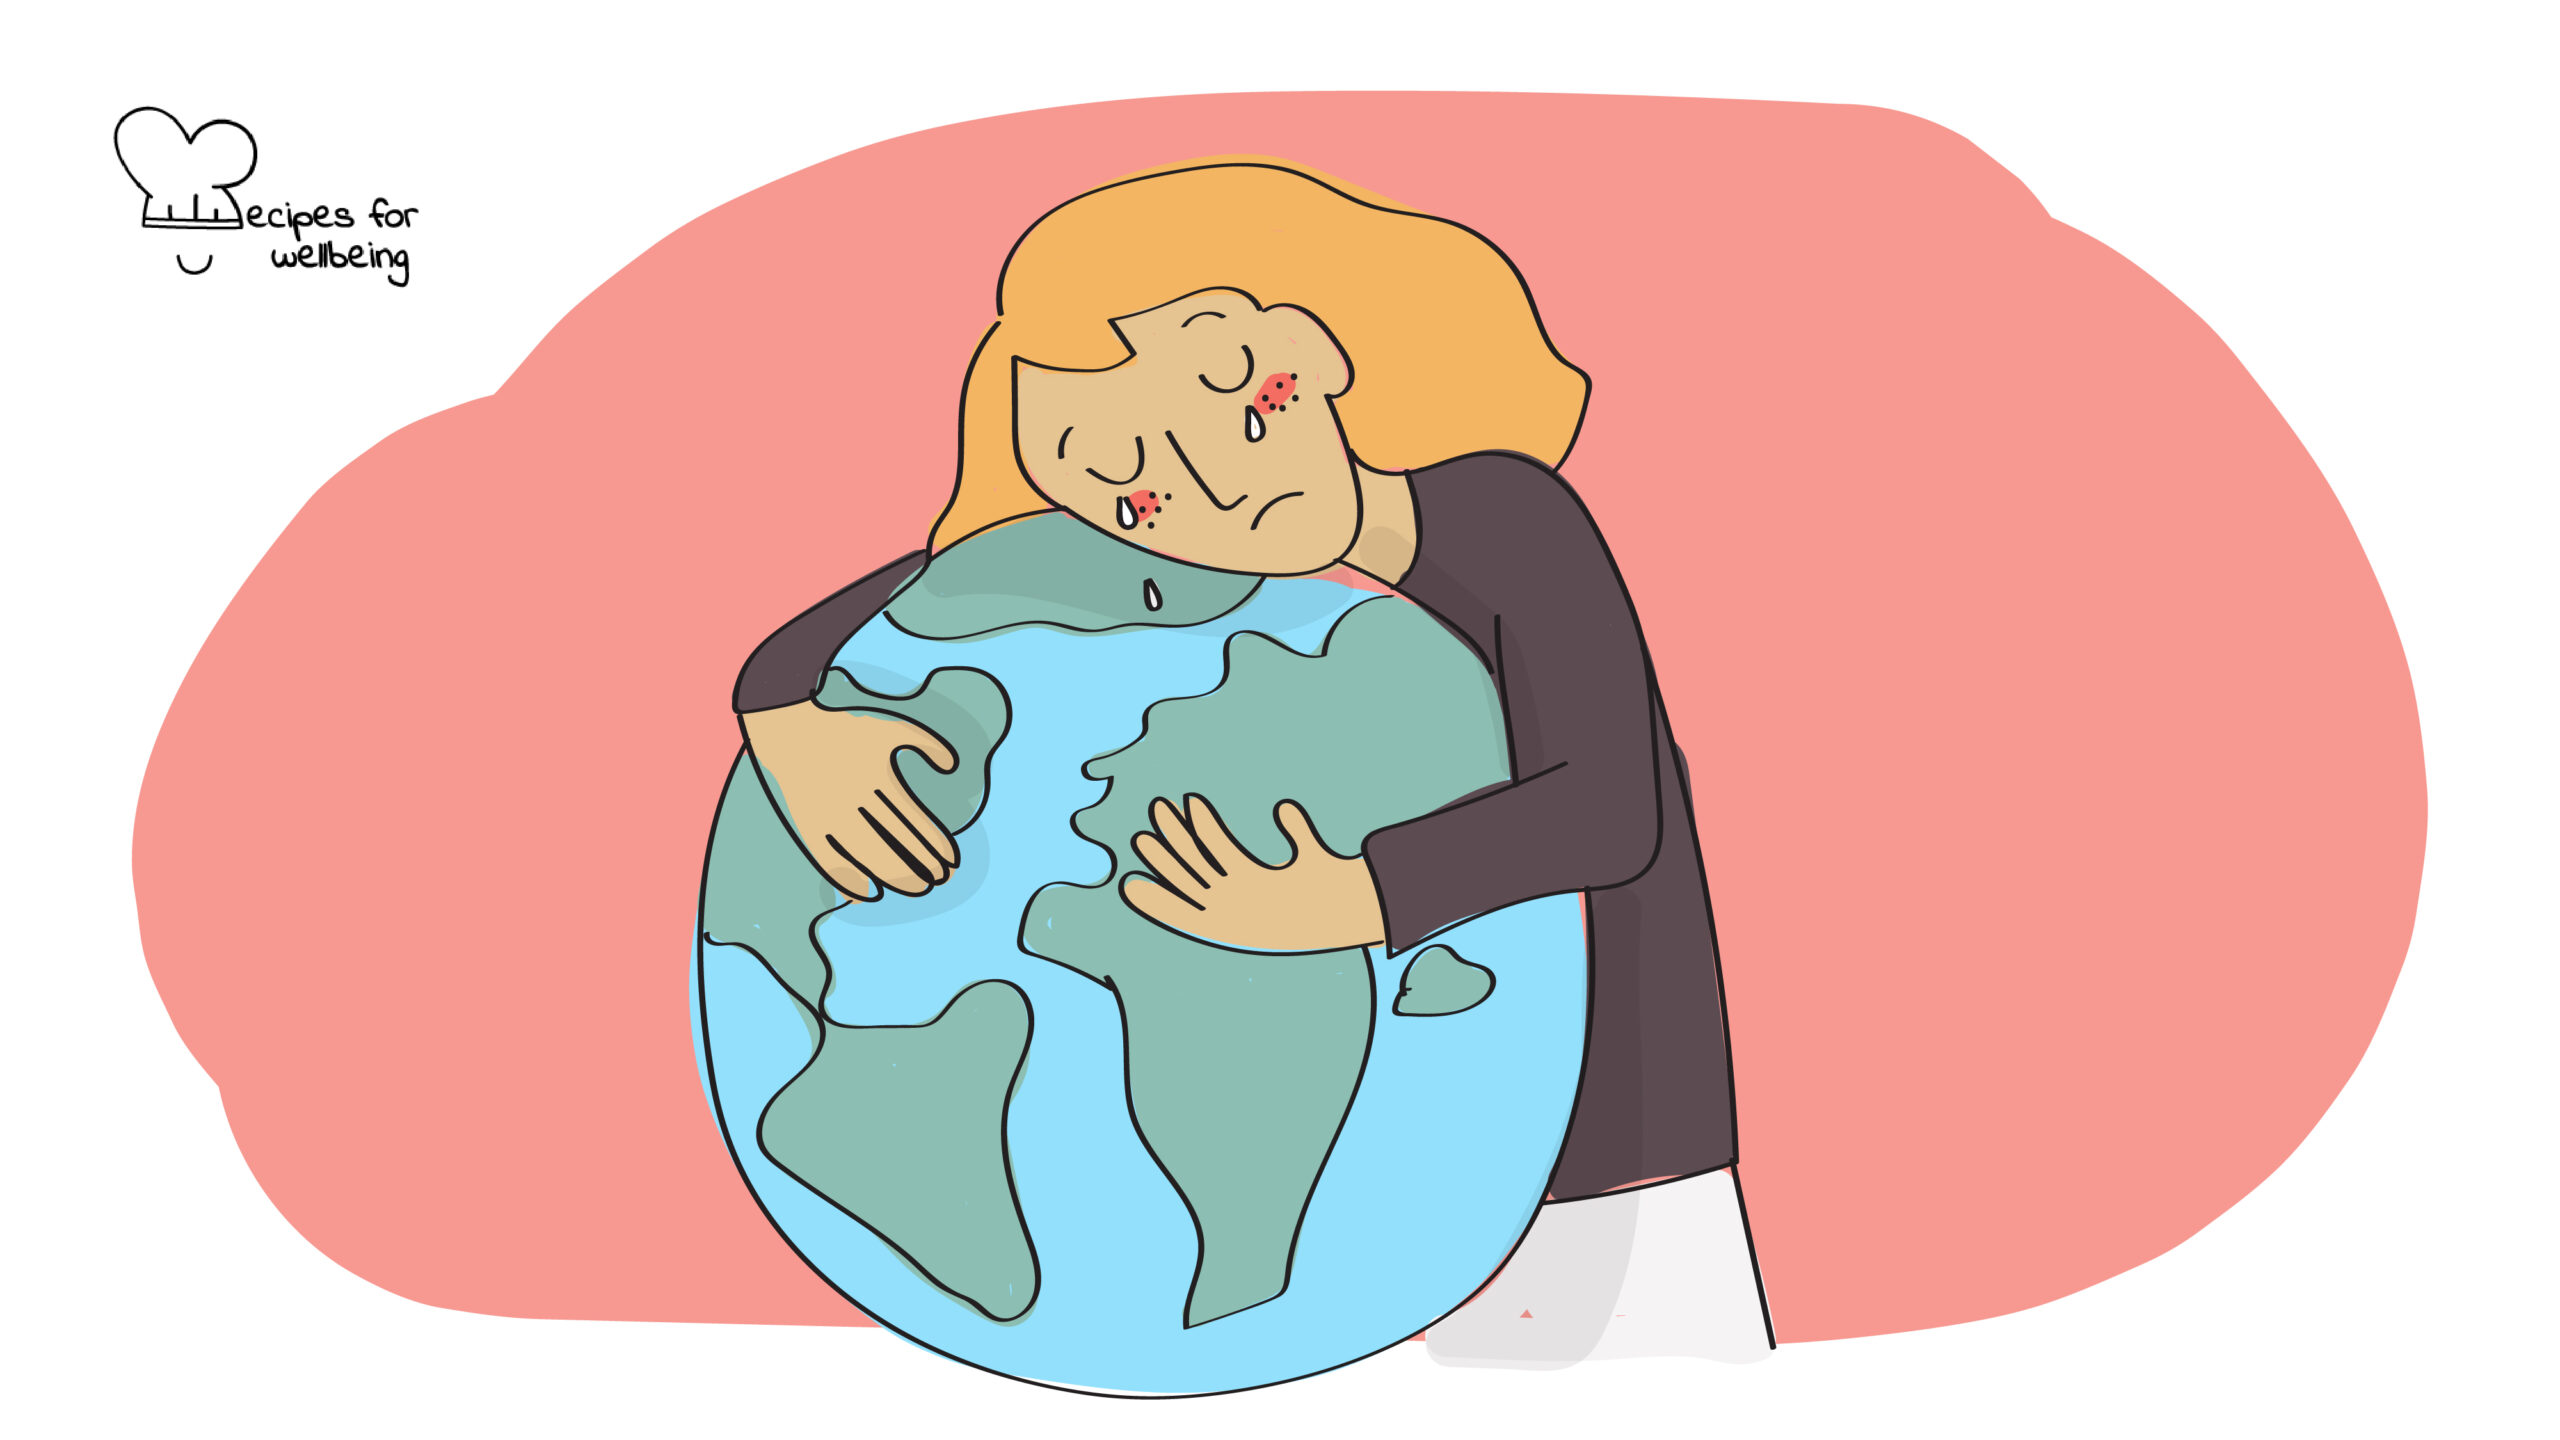 Illustration of a person crying while hugging the globe. © Recipes for Wellbeing